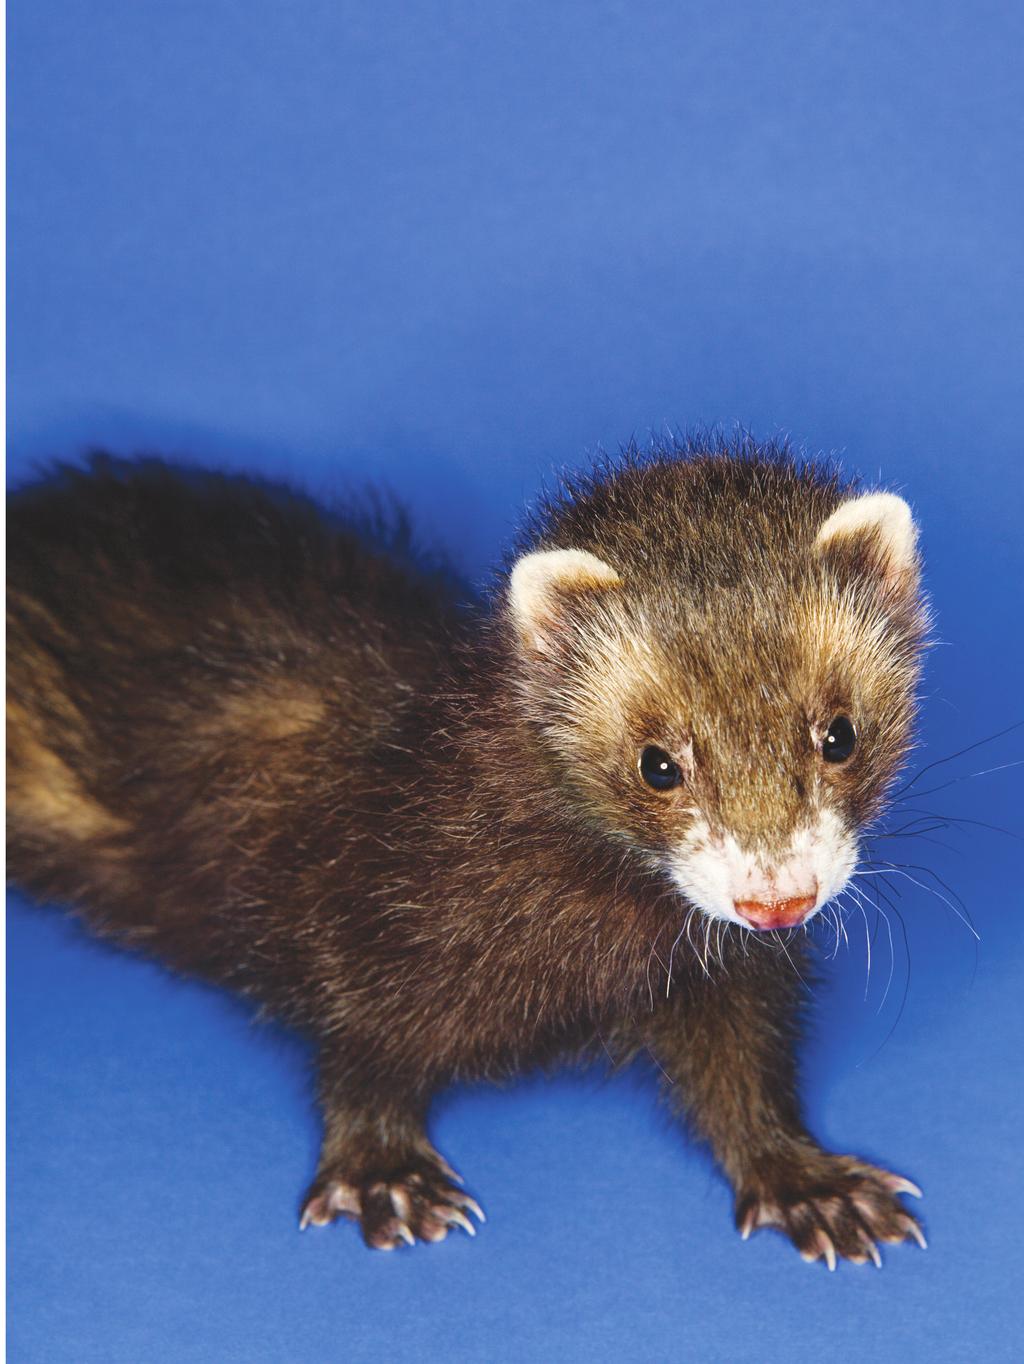 PROBLEM-BASED LEARNING IN THE SCIENCES Ferret It